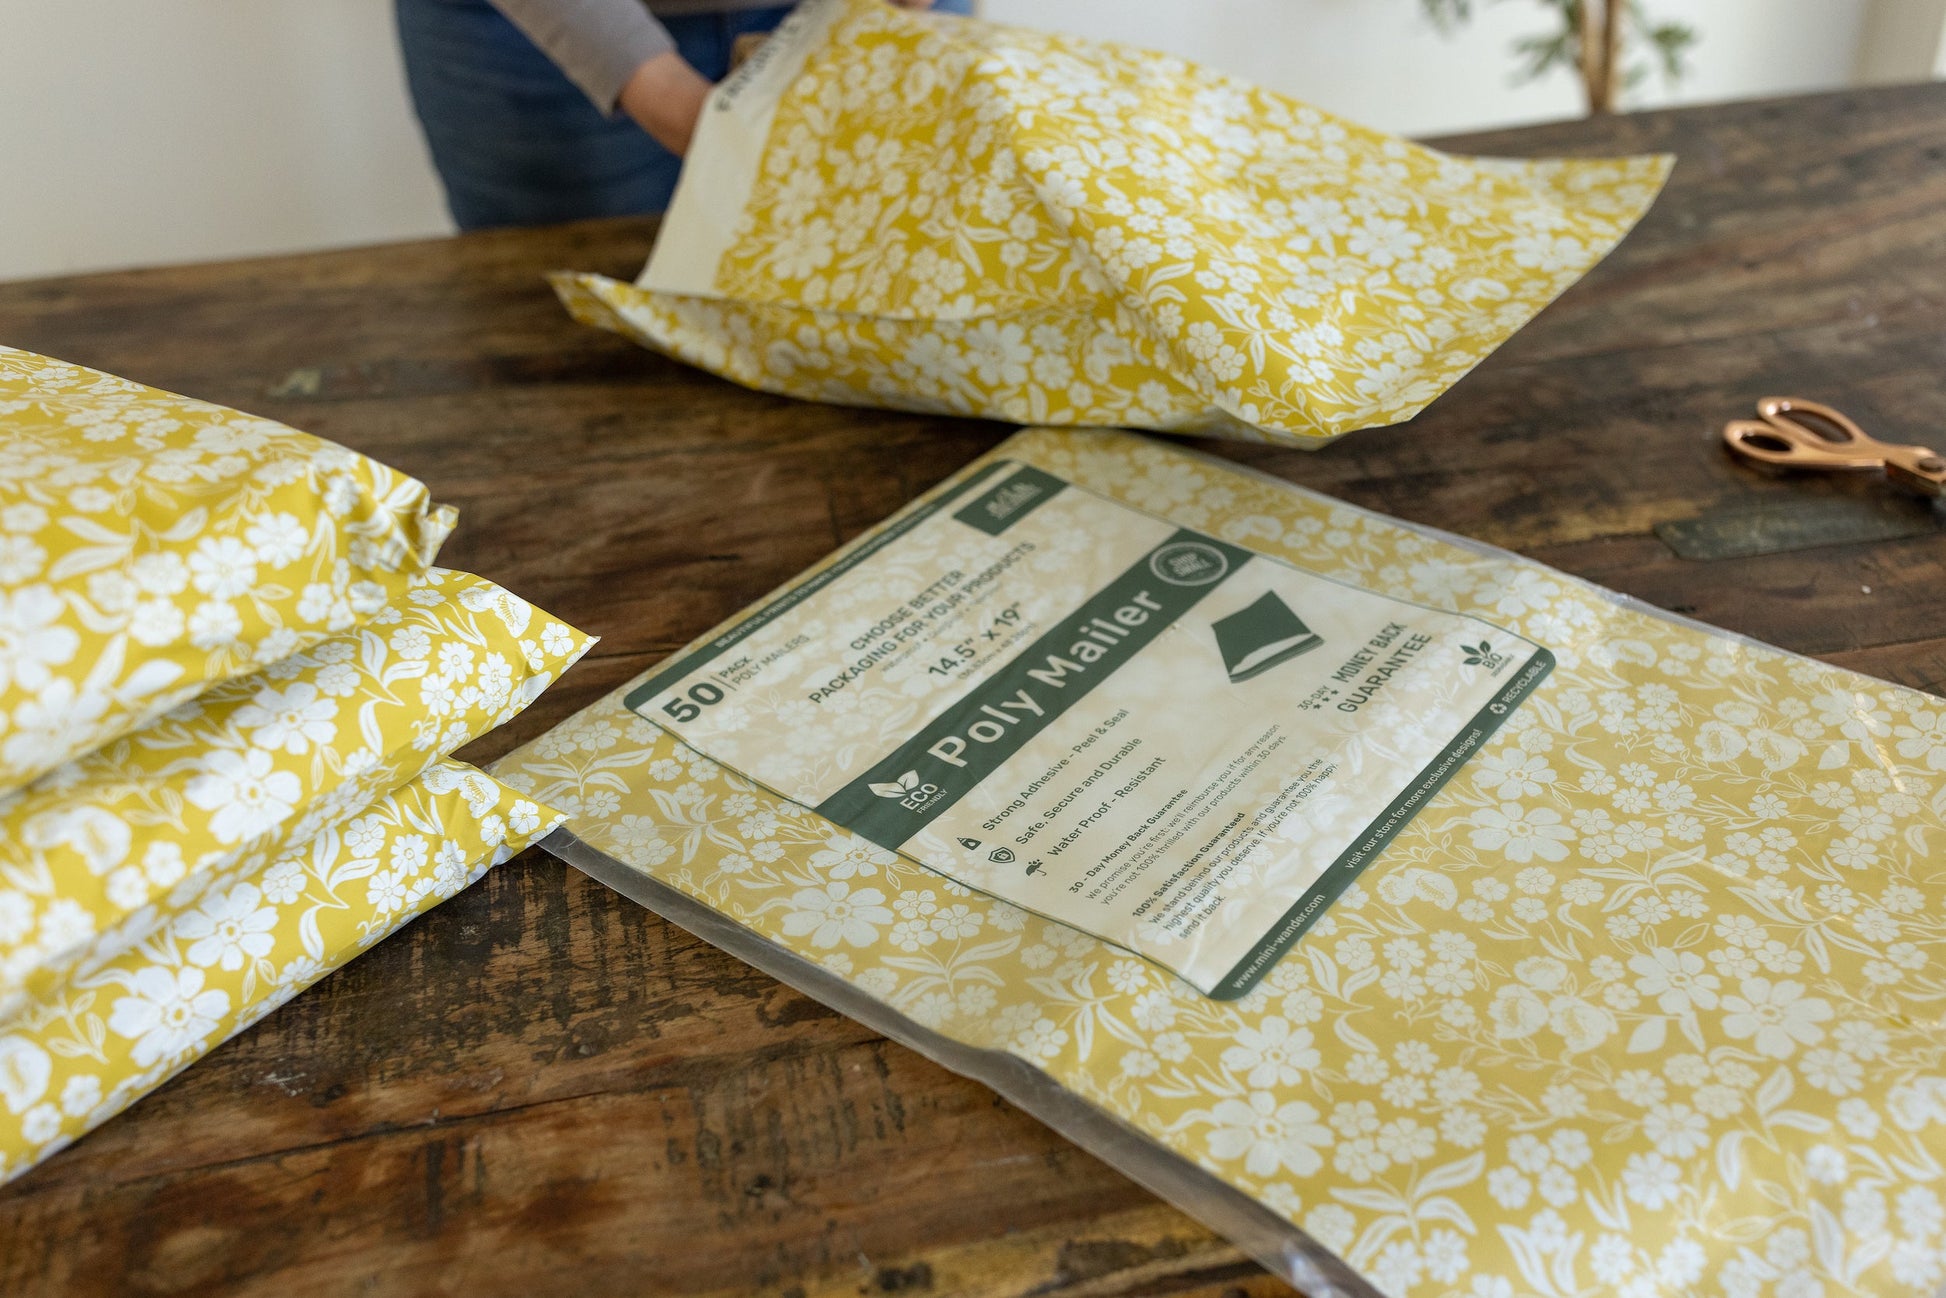 50 XL POLYMAILER BAGS with a cheerful yellow design